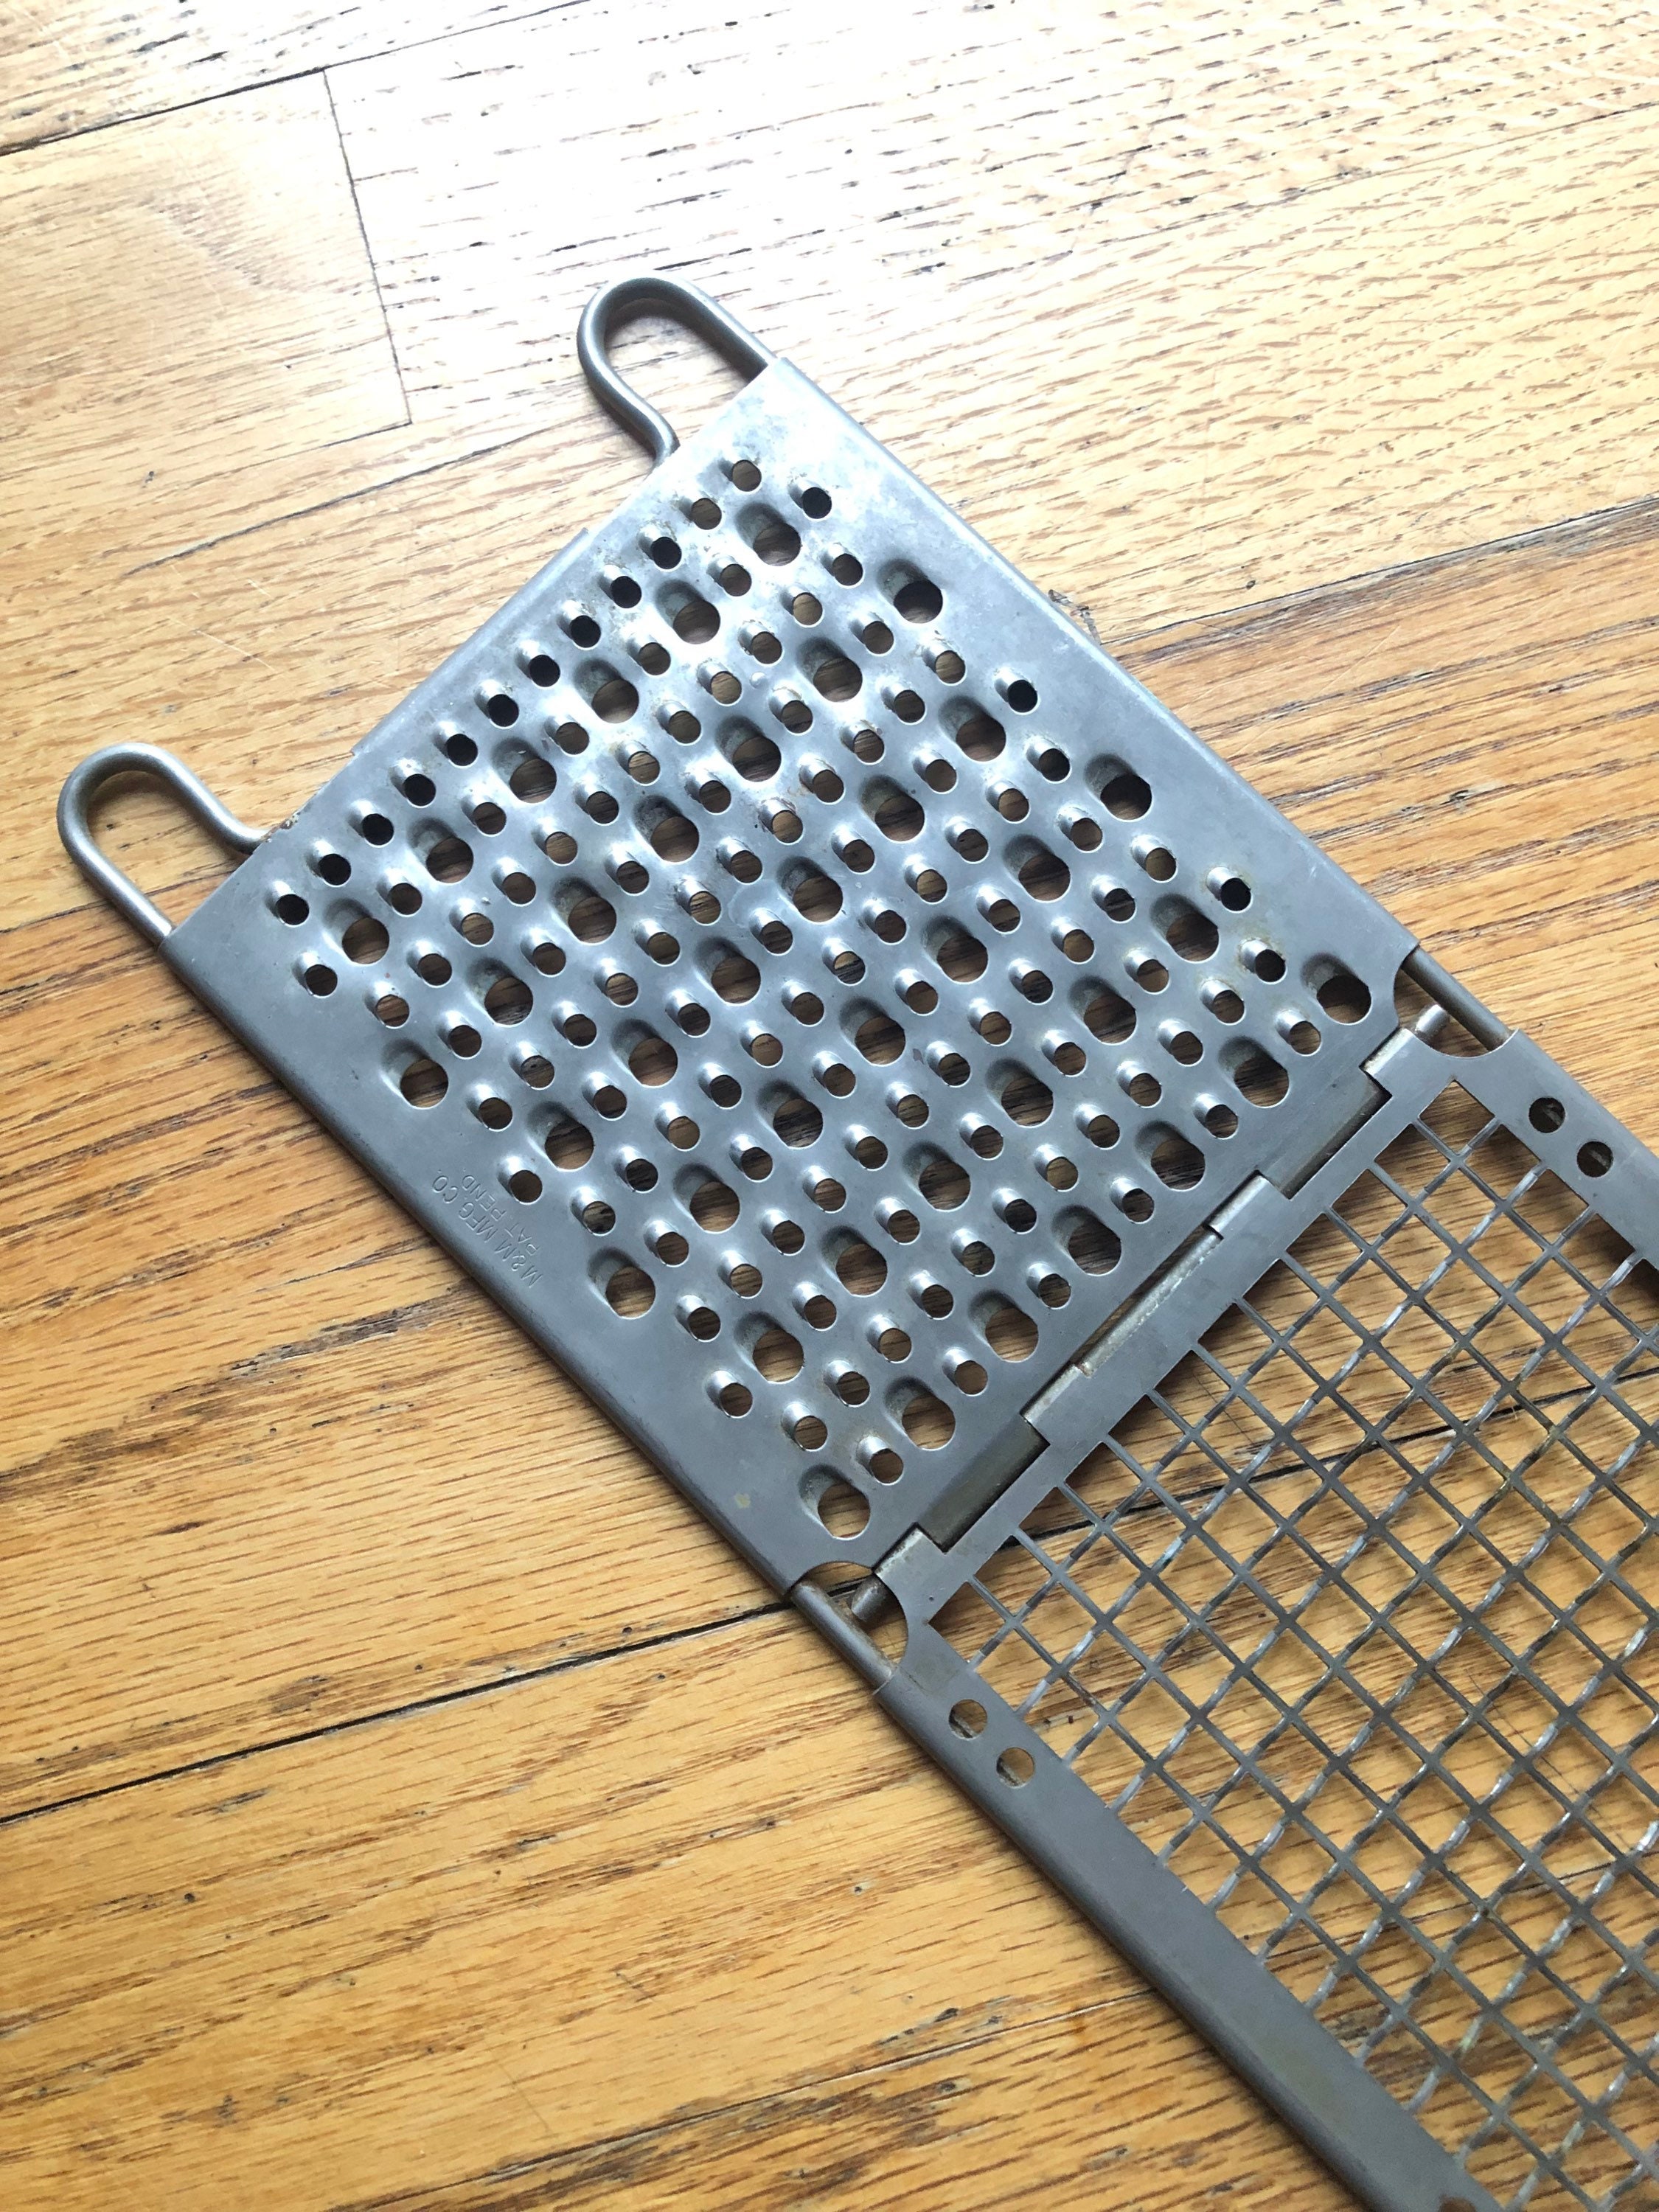 All in One Cheese Grater Stainless Steel Rusty Old Hand Held Citrus Zester  Vintage Kitchen Primitive Decor Towel Holder 